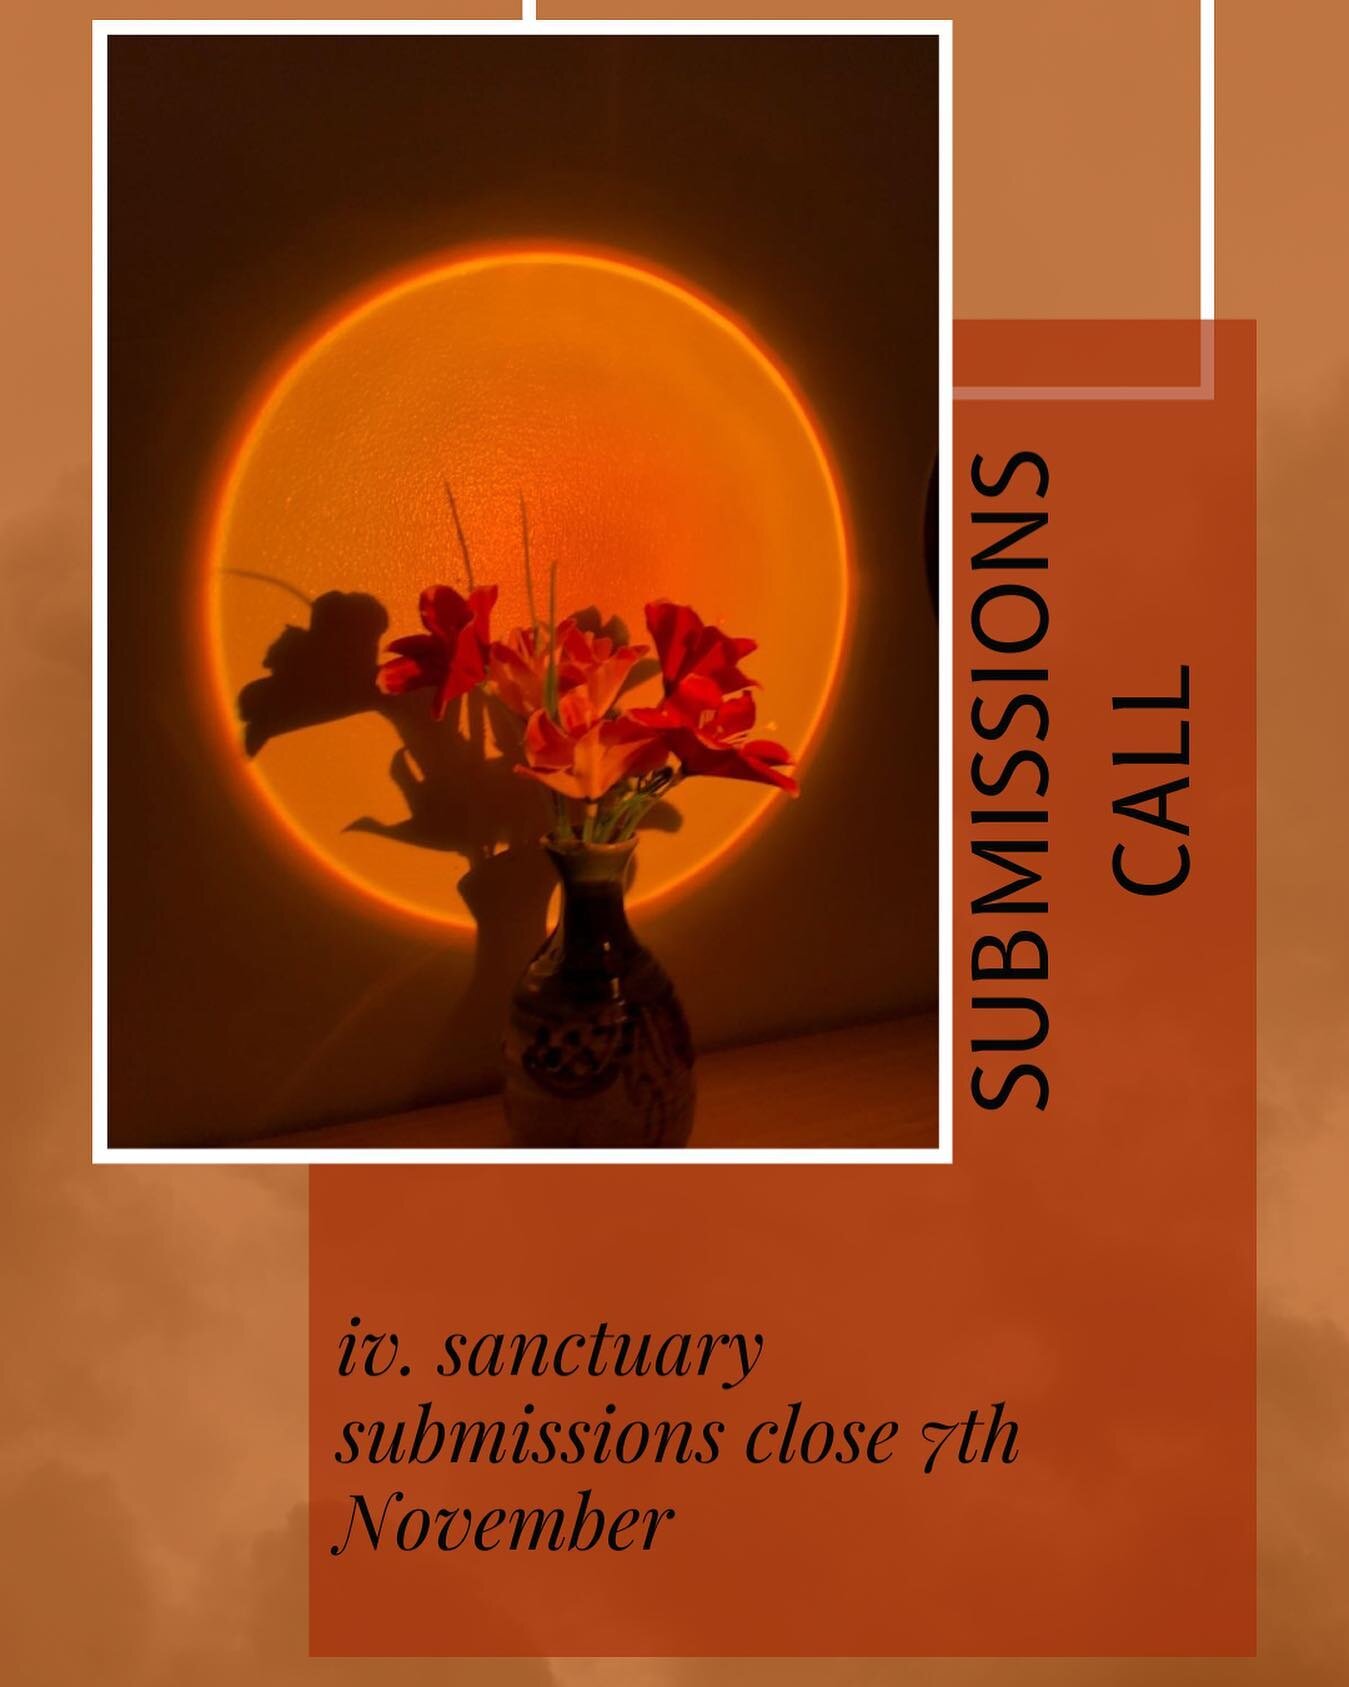 Submit to Sanctuary! 

Less than one week left to submit to our fourth edition, sanctuary. We are particularly looking for PHOTOGRAPHY AND ARTWORK. 

With love, 
&Uacute;na and Jack